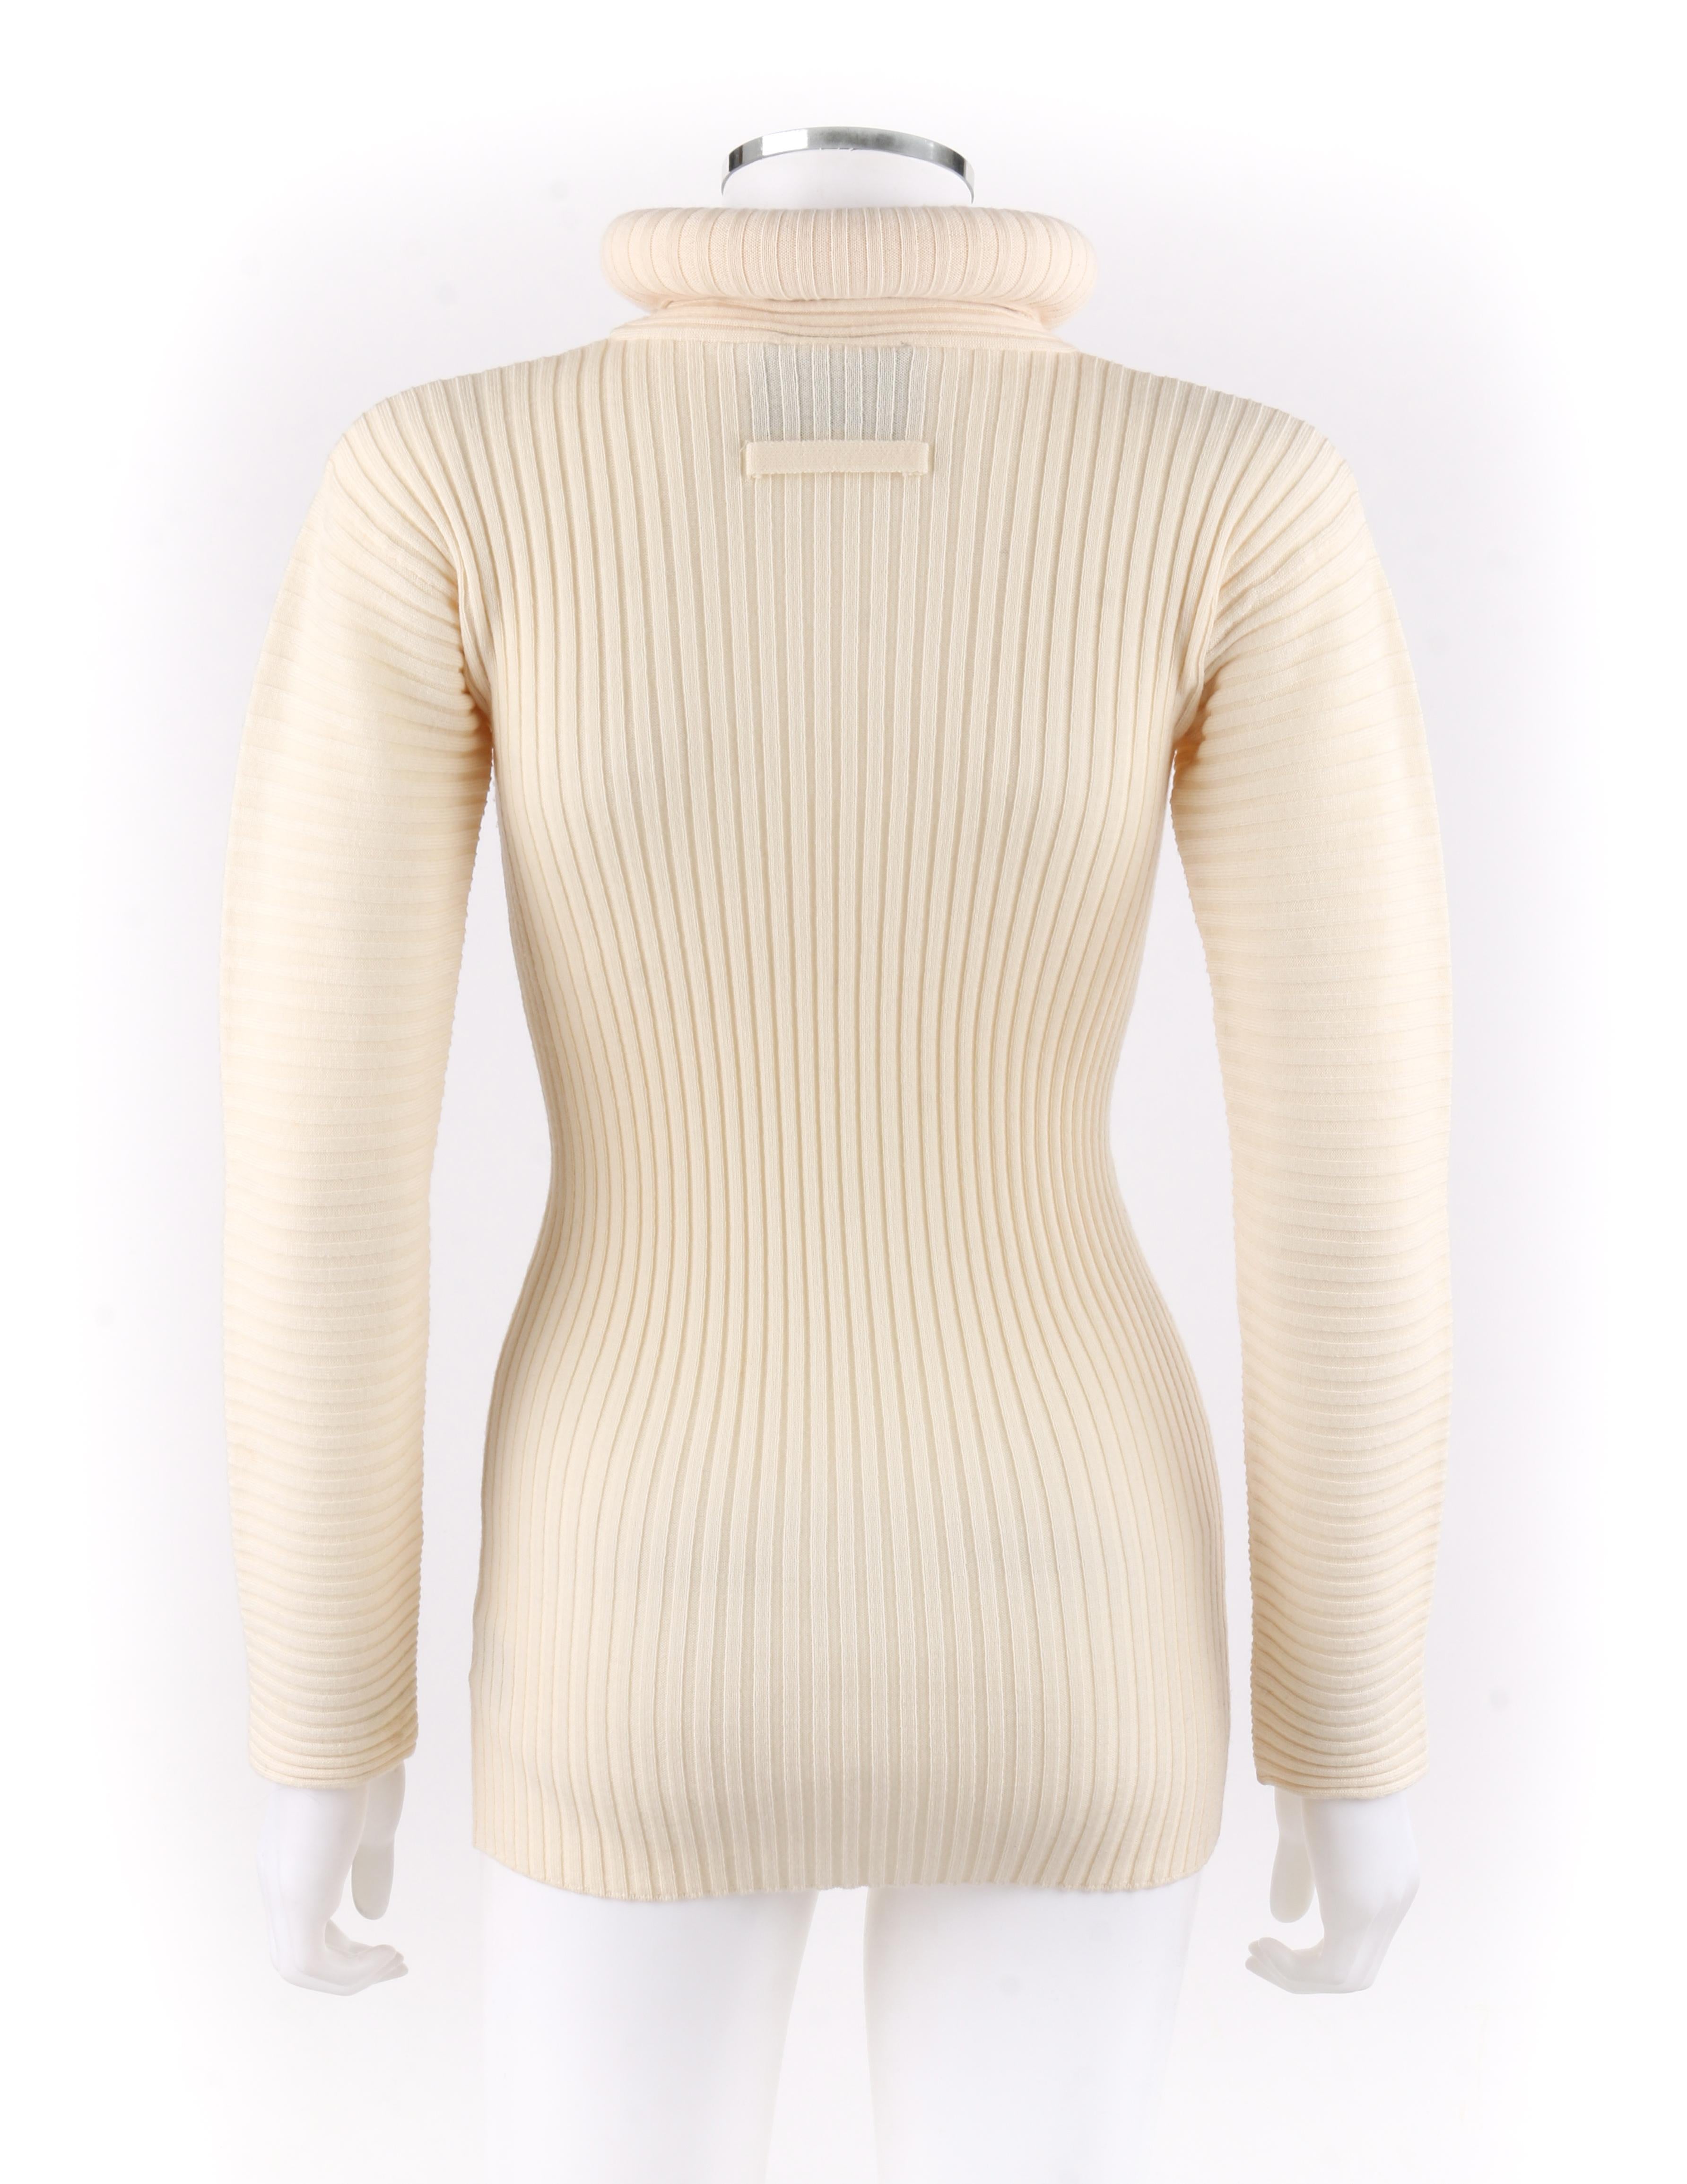 JEAN PAUL GAULTIER Mailie c.1990’s Ivory Turtleneck Ribbed Knit Wool Sweater 1